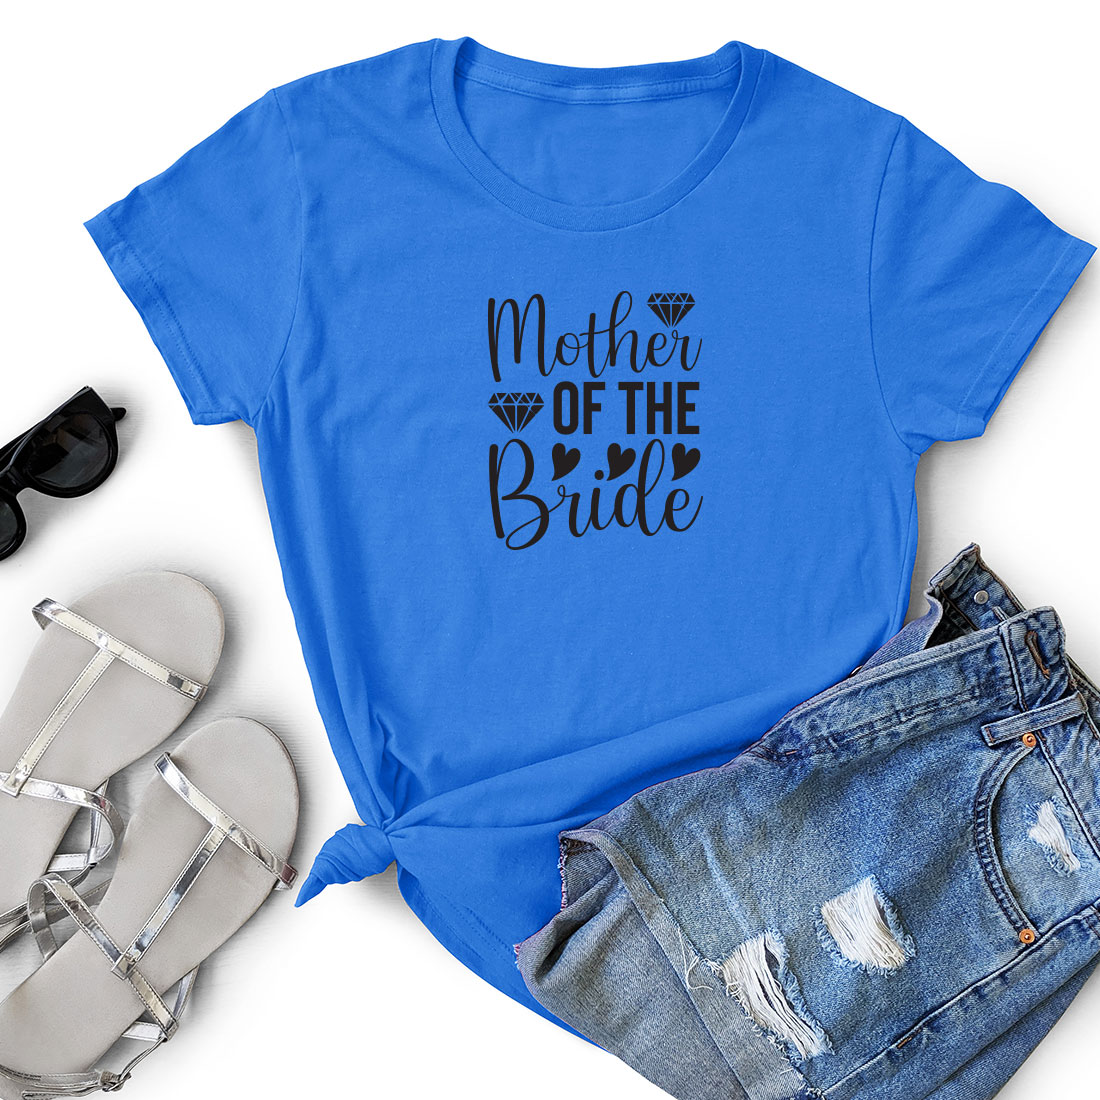 T - shirt that says mother of the bride next to a pair of shorts.